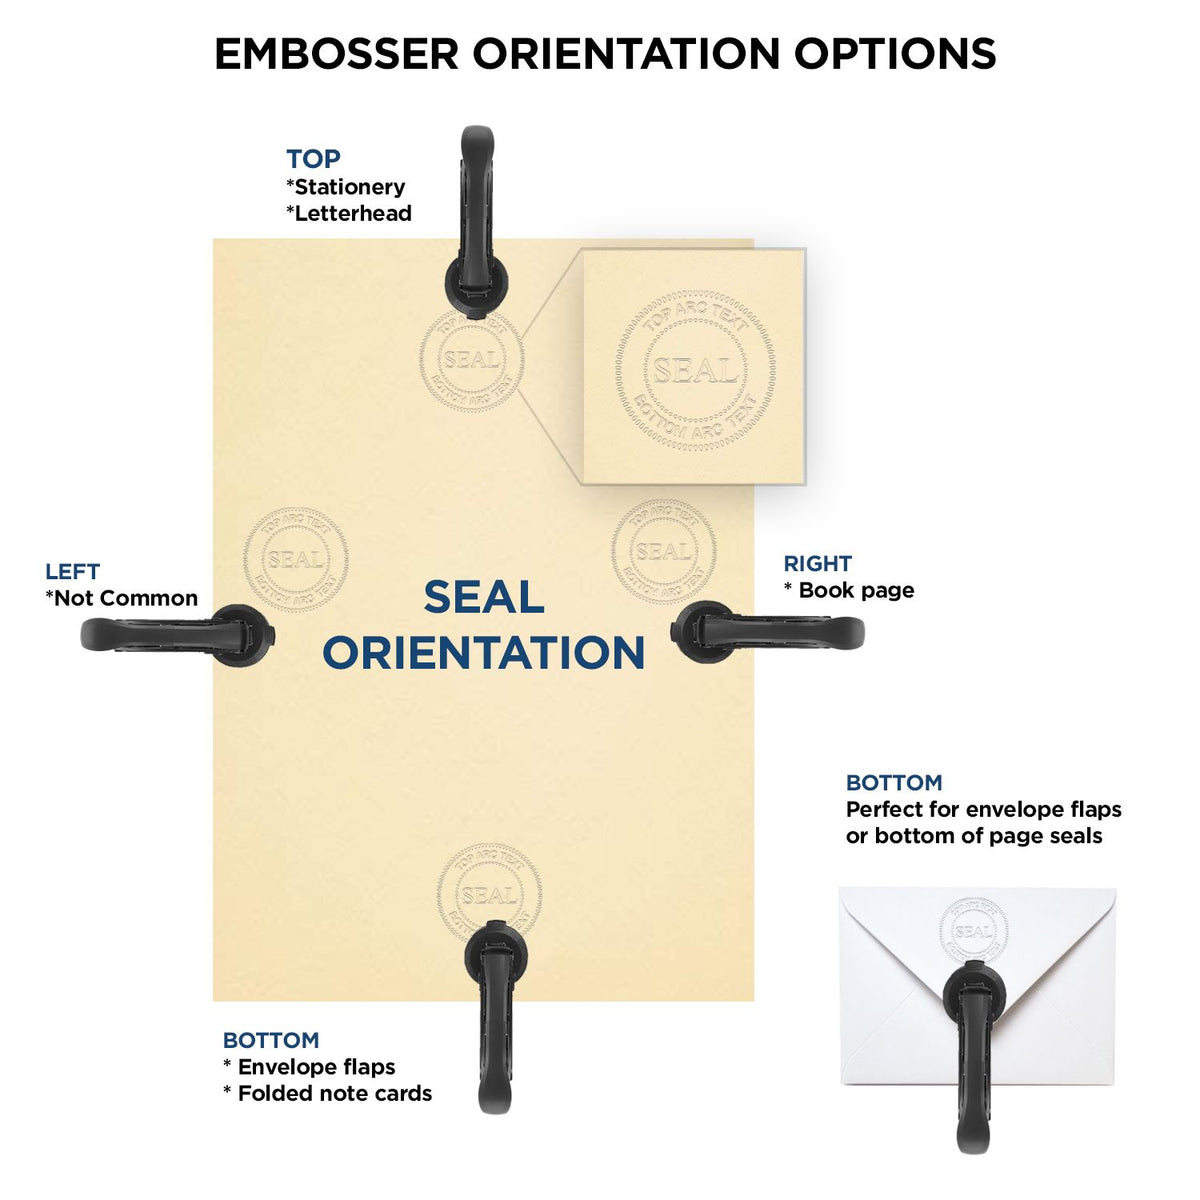 An infographic for the Soft Pocket Vermont Landscape Architect Embosser showing embosser orientation, this is showing examples of a top, bottom, right and left insert.